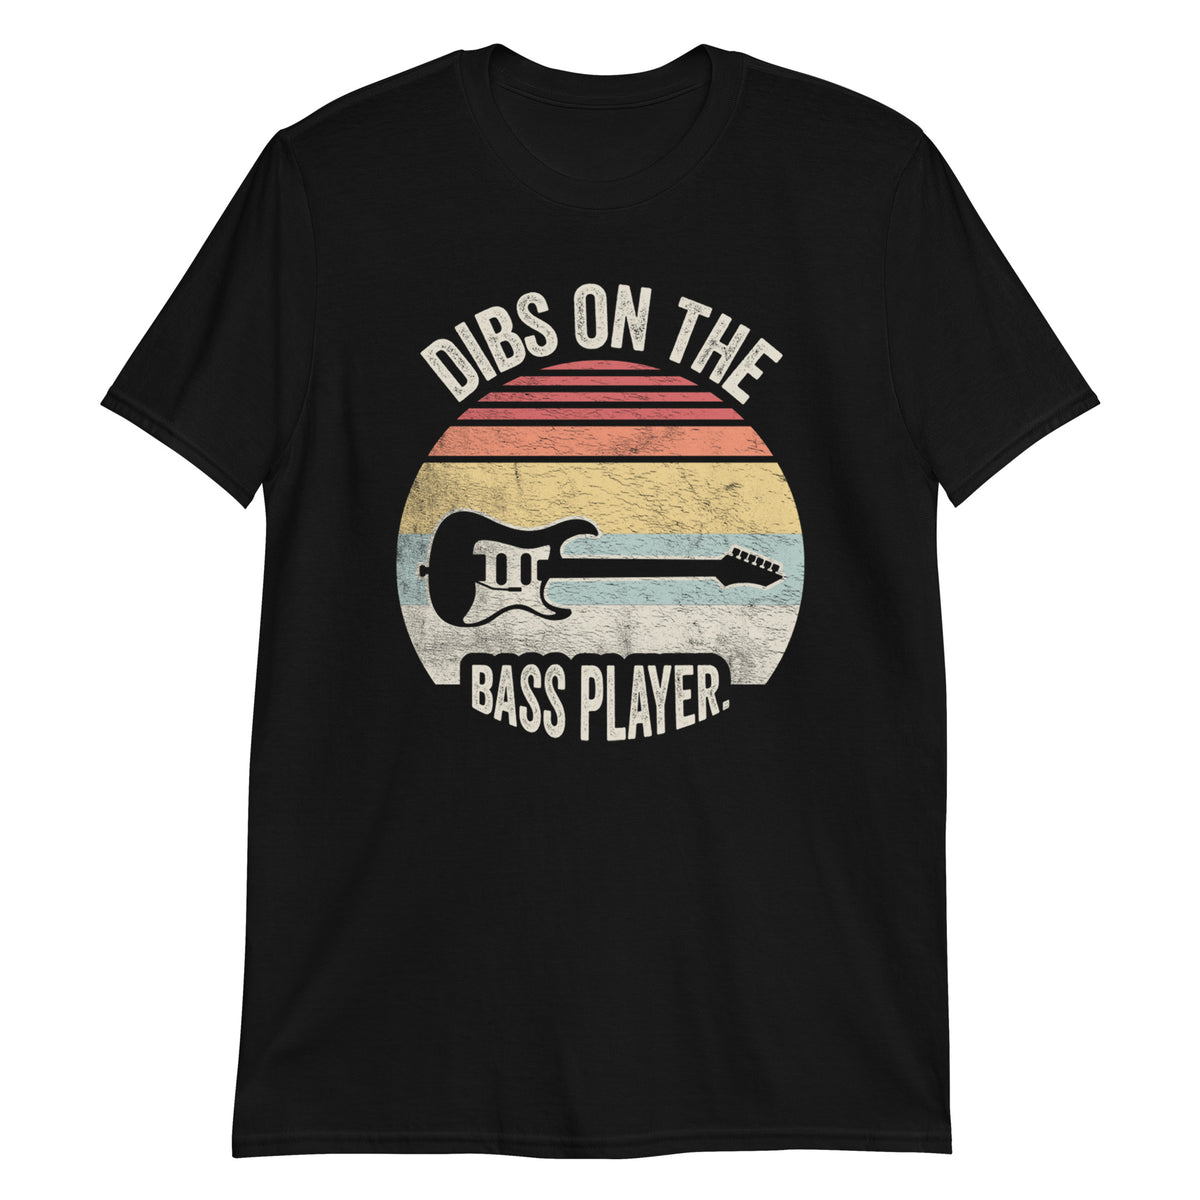 Dibs On The Bass Player Retro Distressed Music T-Shirt